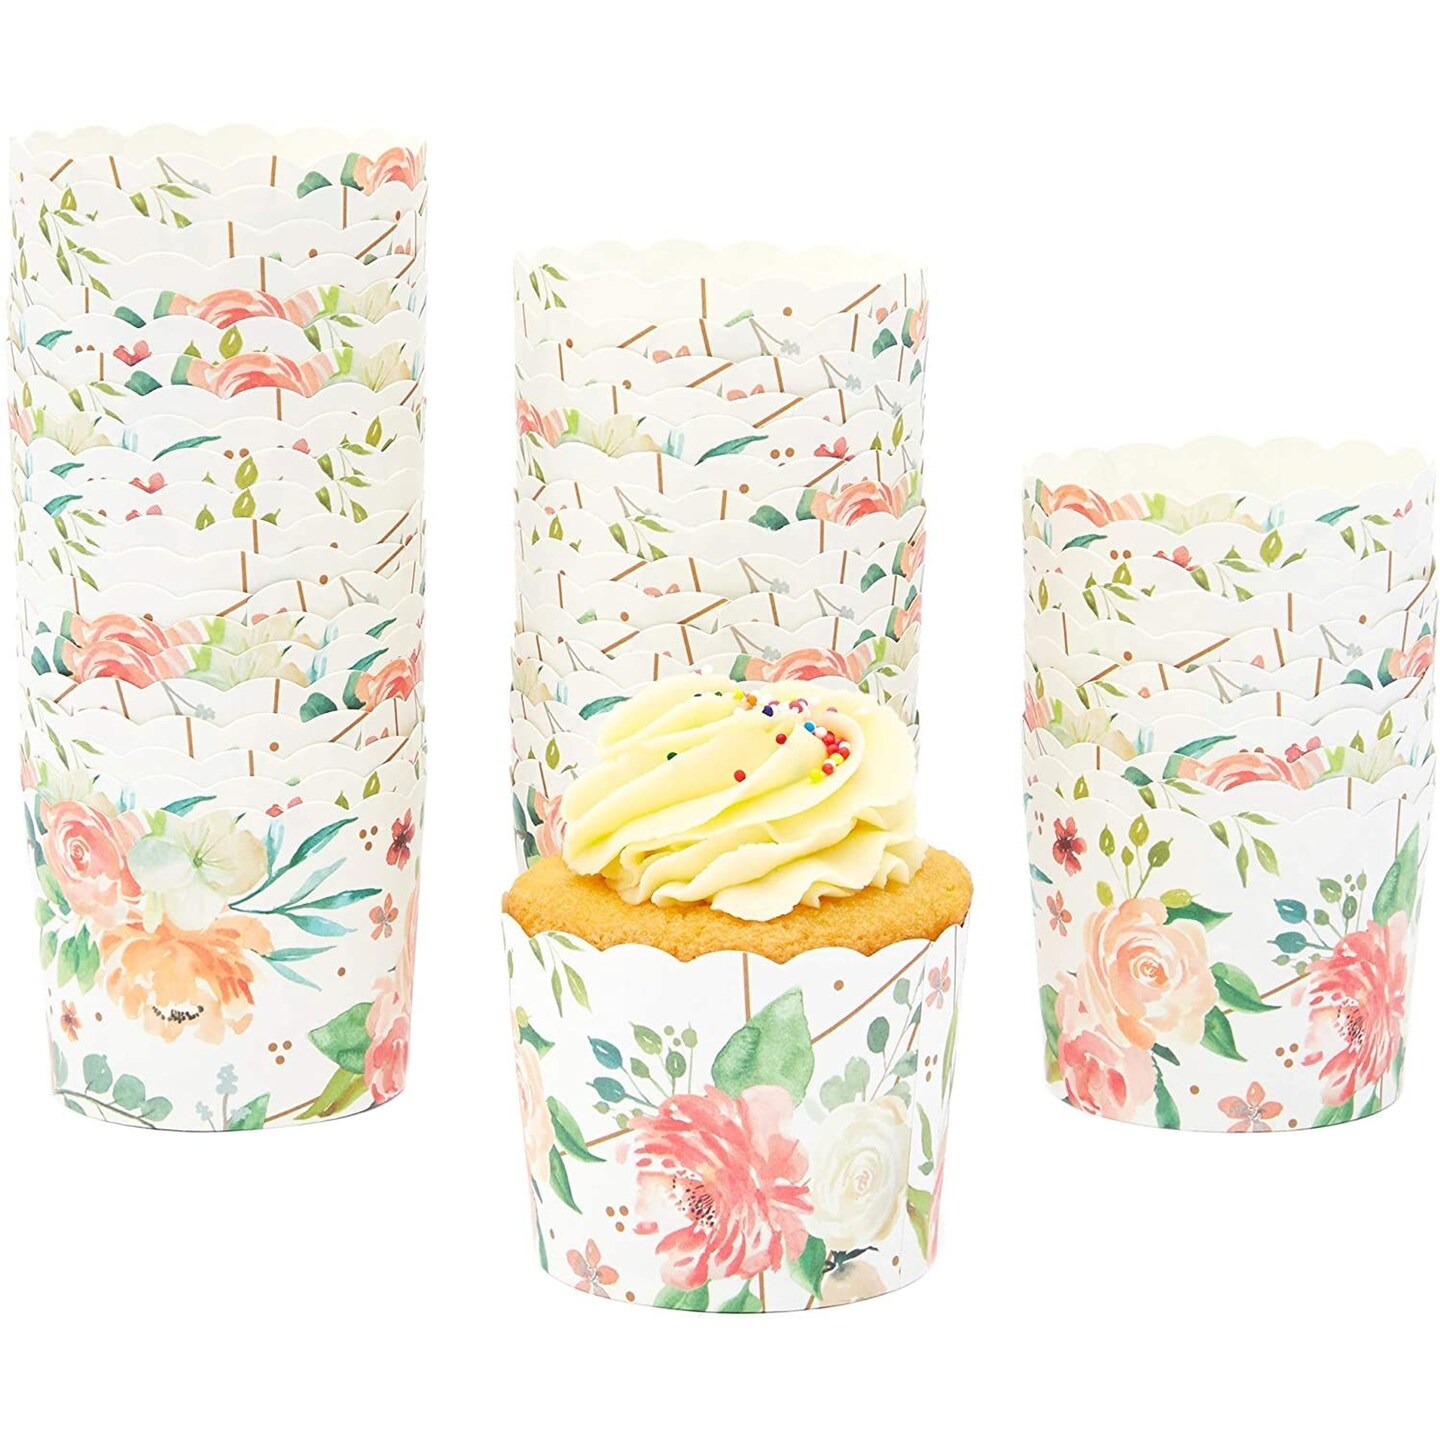 50 Pack Floral Cupcake Wrappers for Wedding, Watercolor Flower Paper Baking Cups and Muffin Liners for Garden Tea Parties, Baking Favors, Bridal or Baby Showers- (2.25 x 2.75 In)